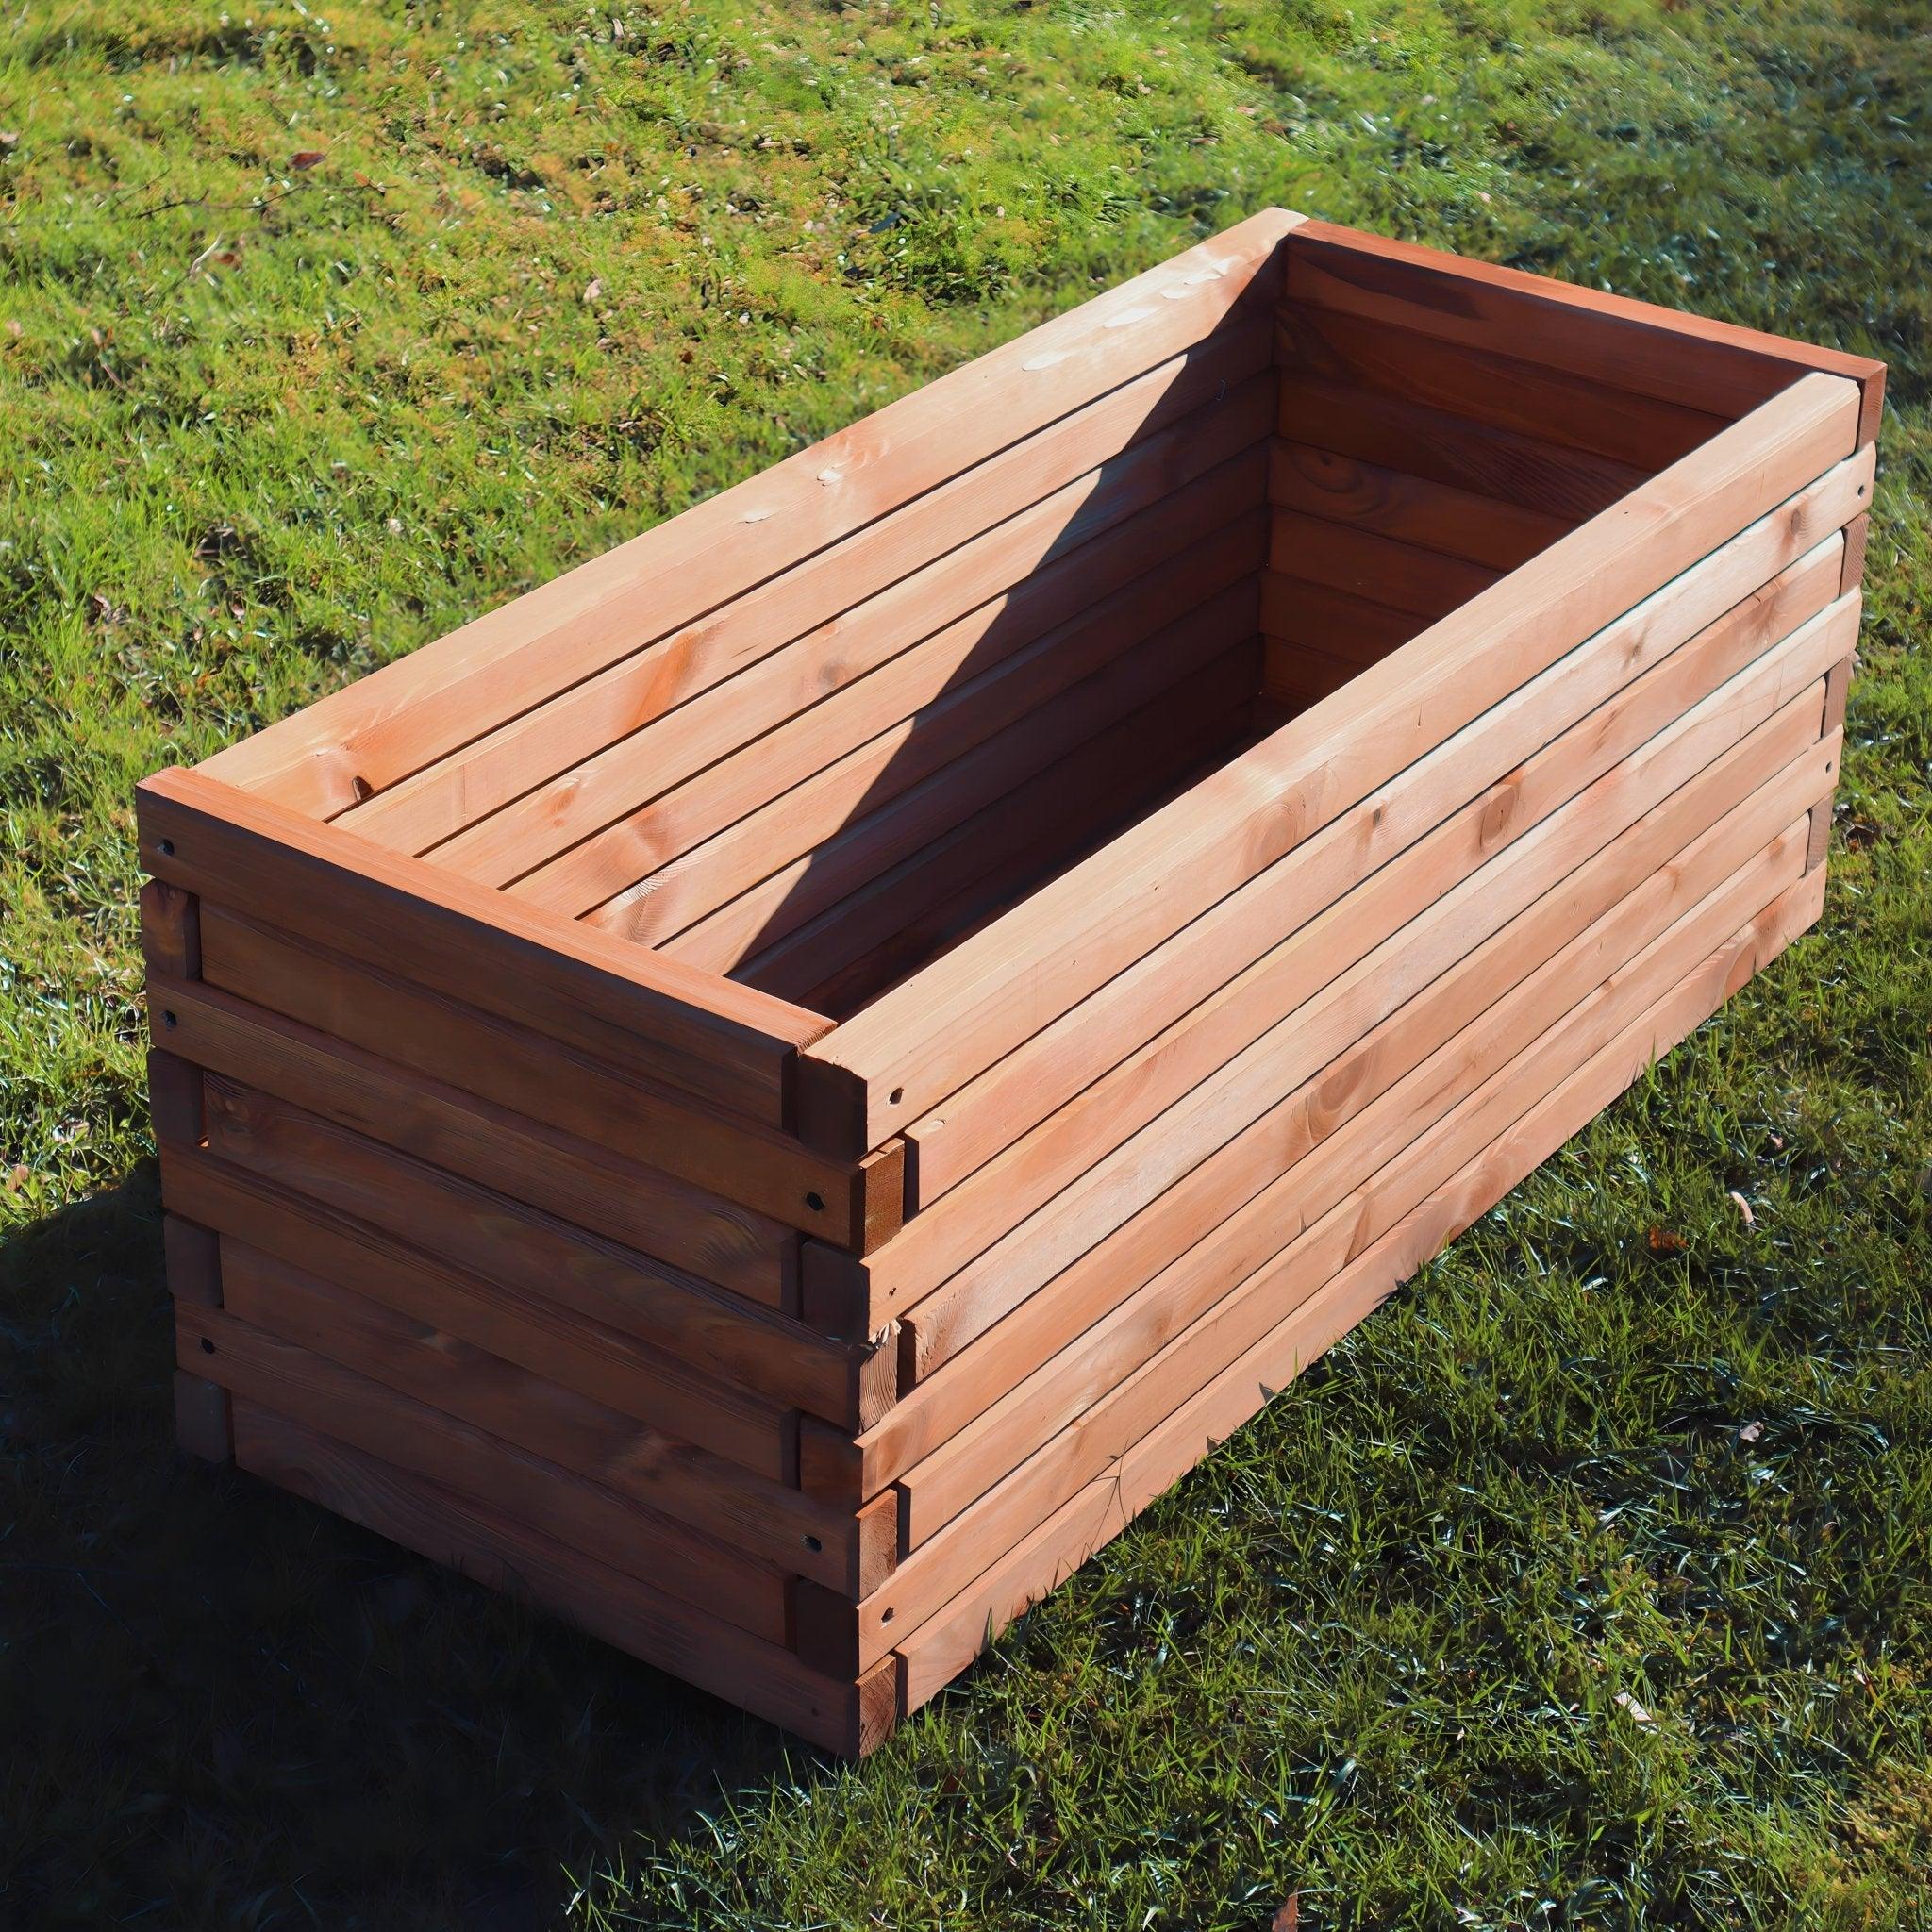 Wooden Raised Trough Planter 1.2m long by Woven Wood